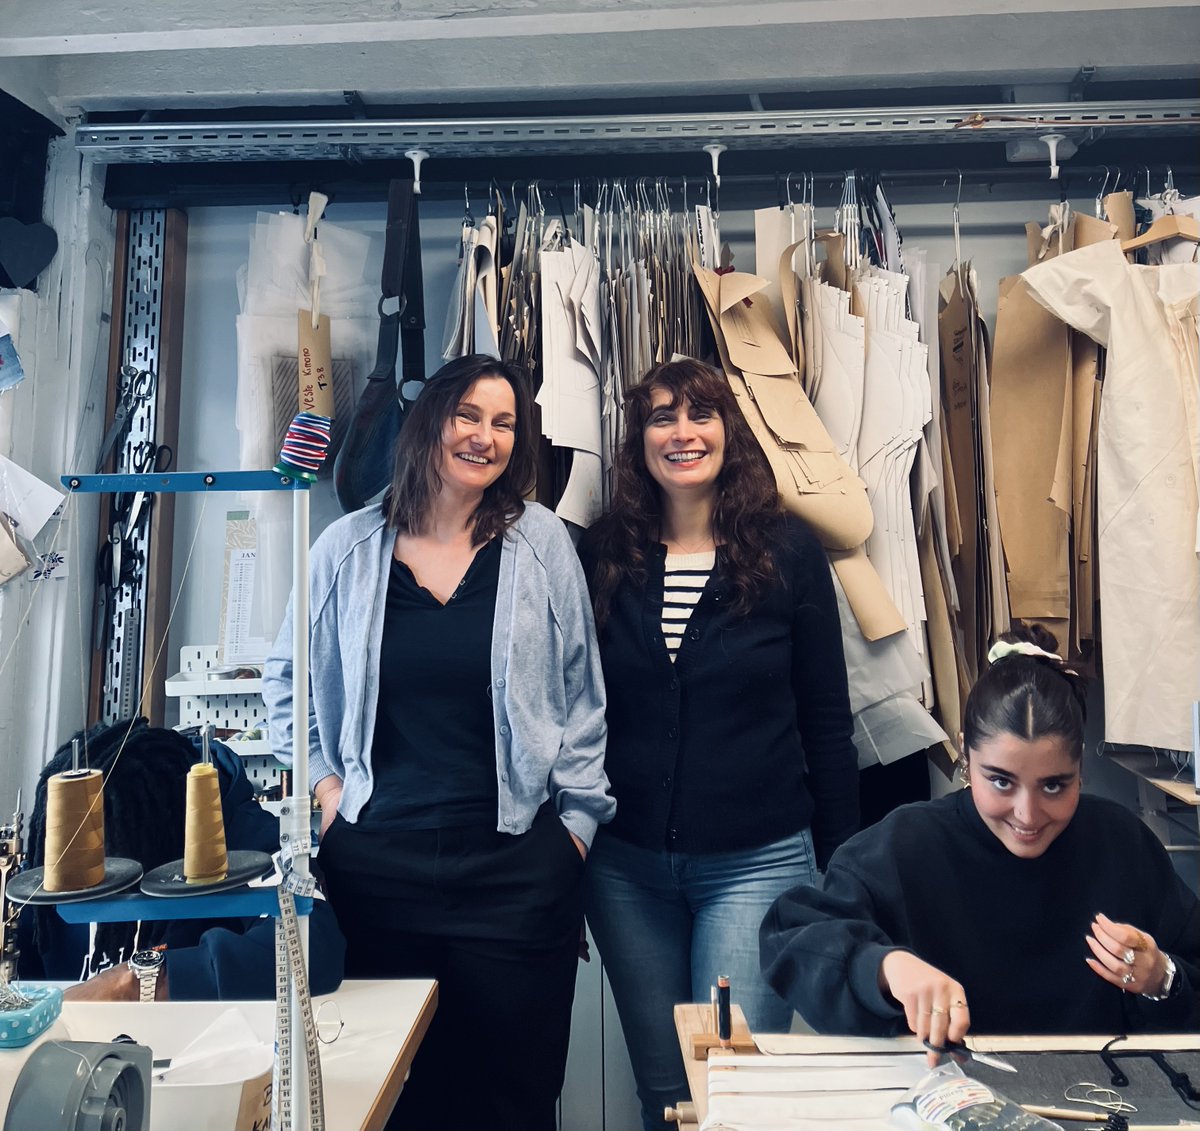 Check out our latest Lawfully Creative podcast episode, with the exceedingly talented Alexandra Latour, from Atelier Latour and 'la veste en jean' here and now! 

#fashionlaw #fashionsector #fashionbusiness #luxurysector #luxurybusiness #atelierlatour #lawfullycreative…